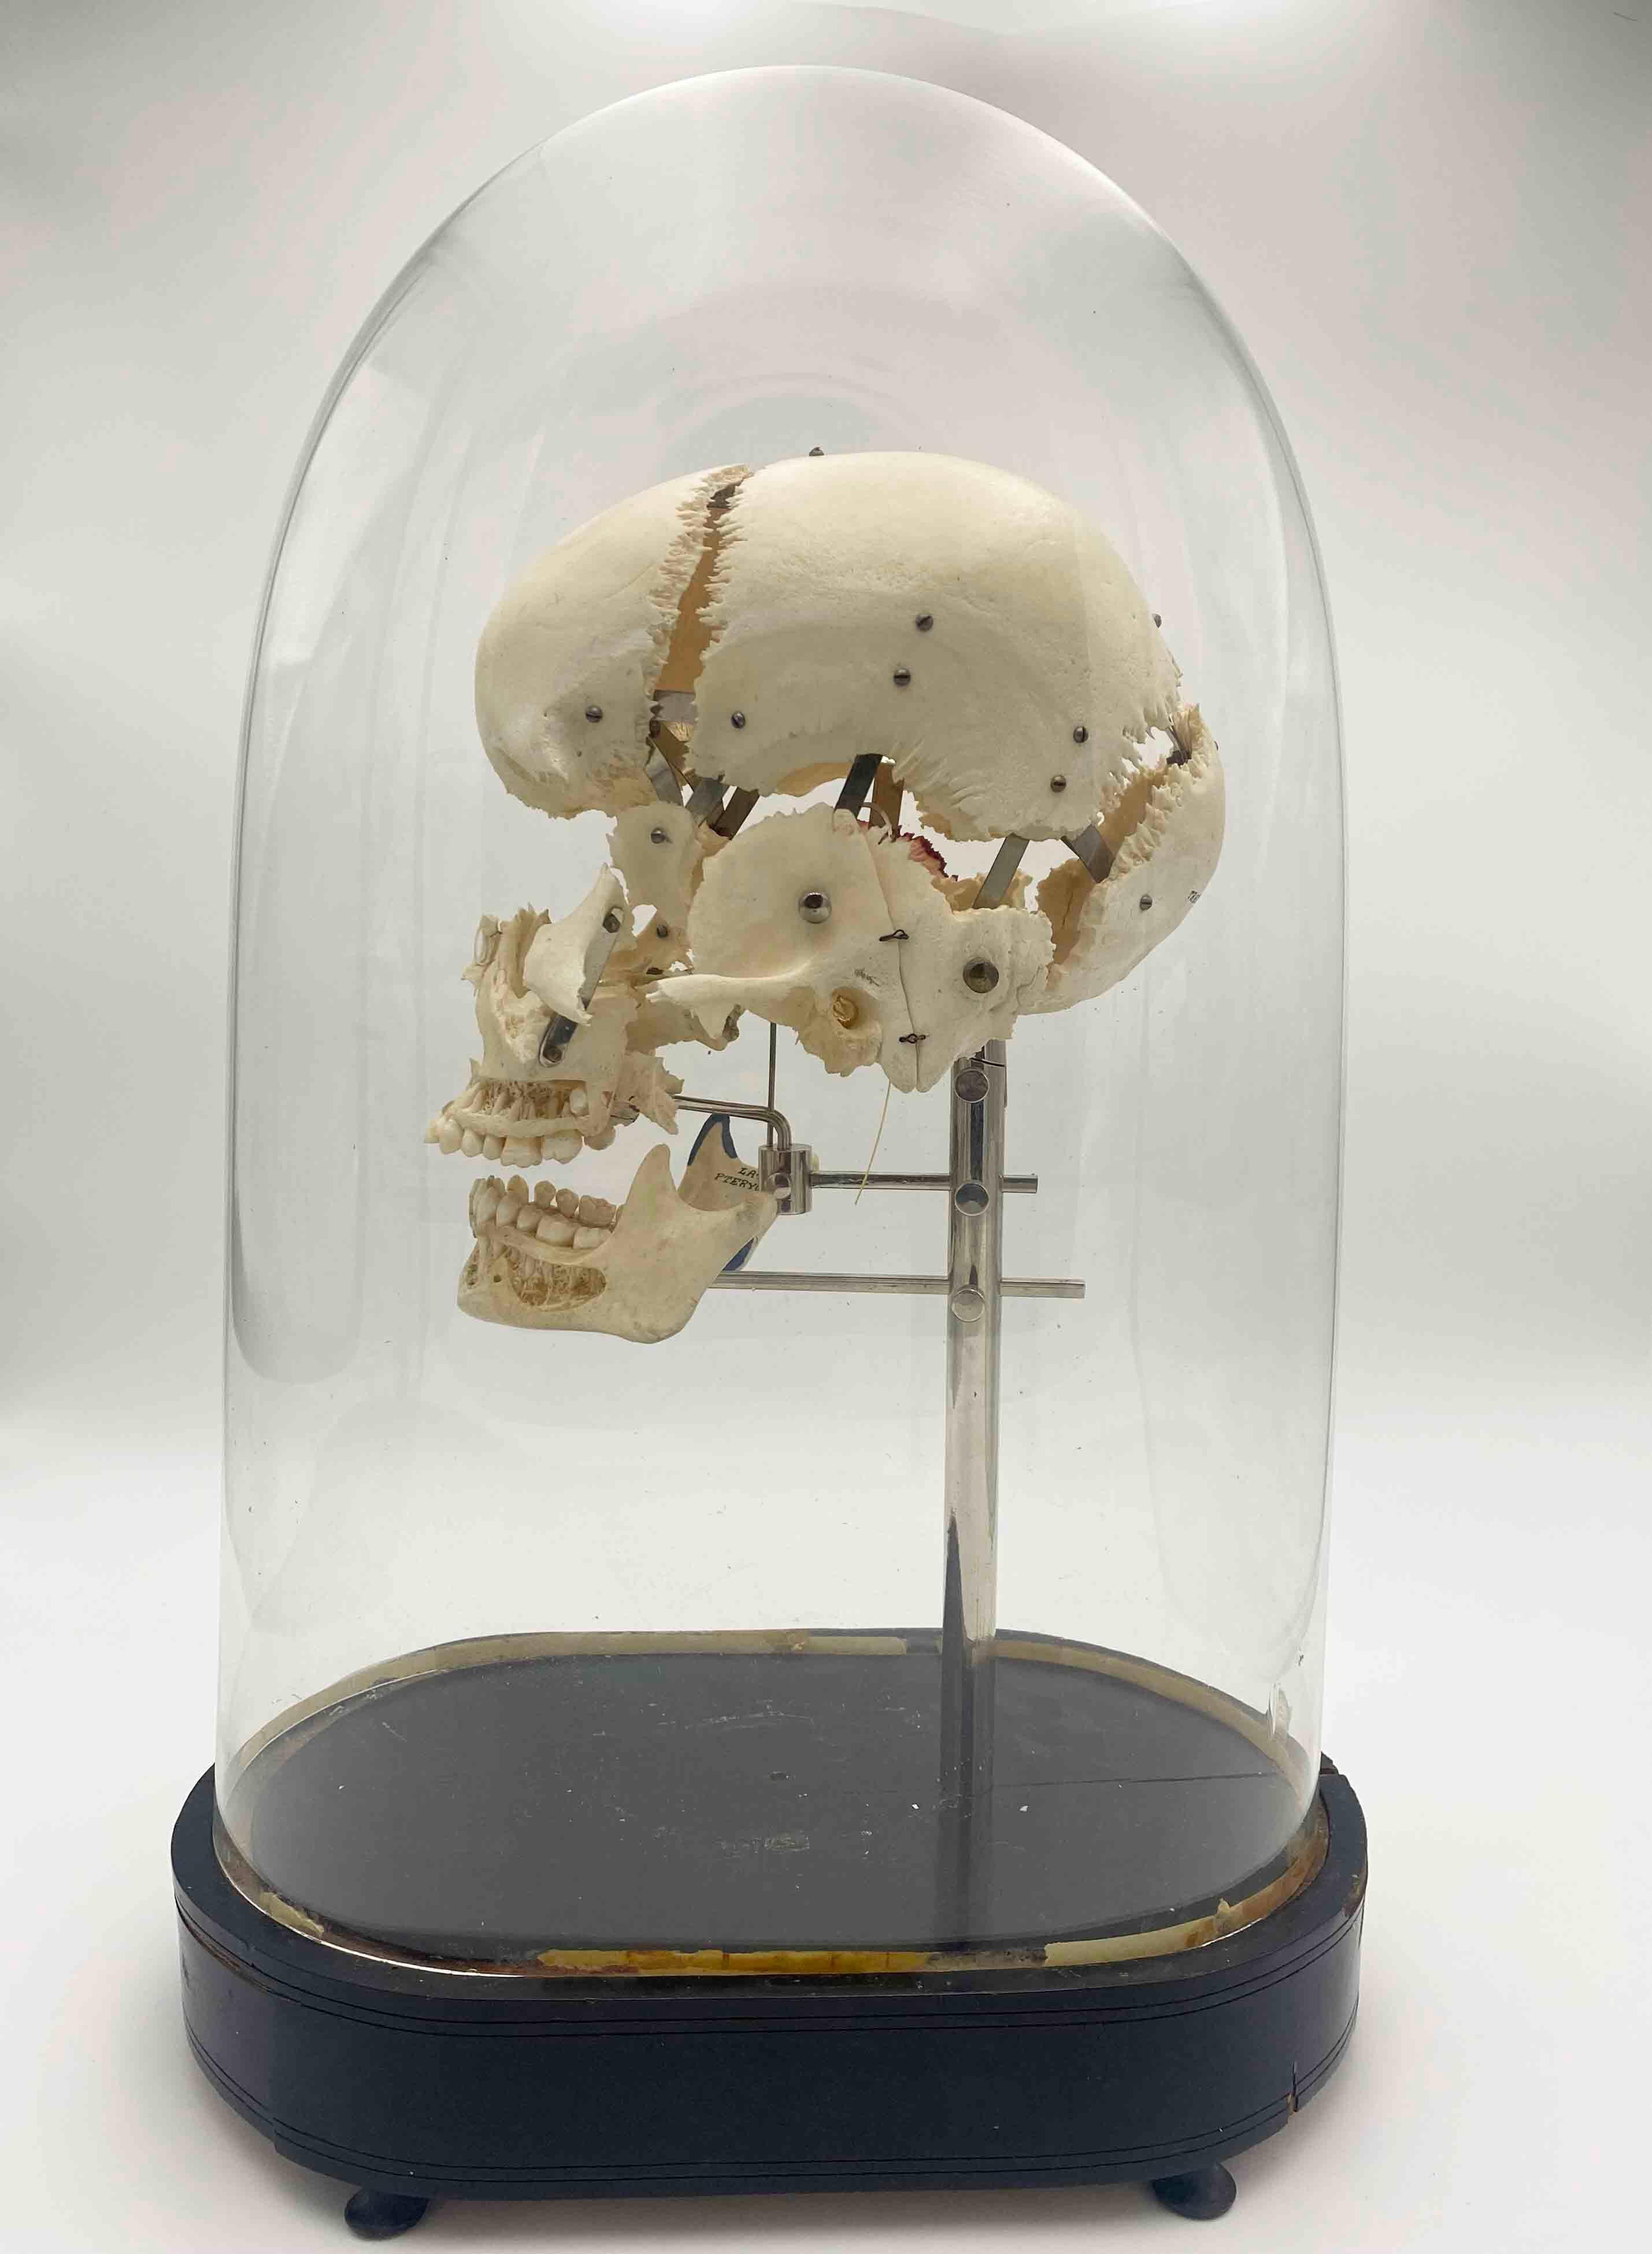 Authentic Exploding Skull

Originally created by Edmé François Chauvot de Beauchêne (ca.1780-1830), a French anatomist and

surgeon, developed this disarticulation method to comprehensively show all the

cranial bones and their